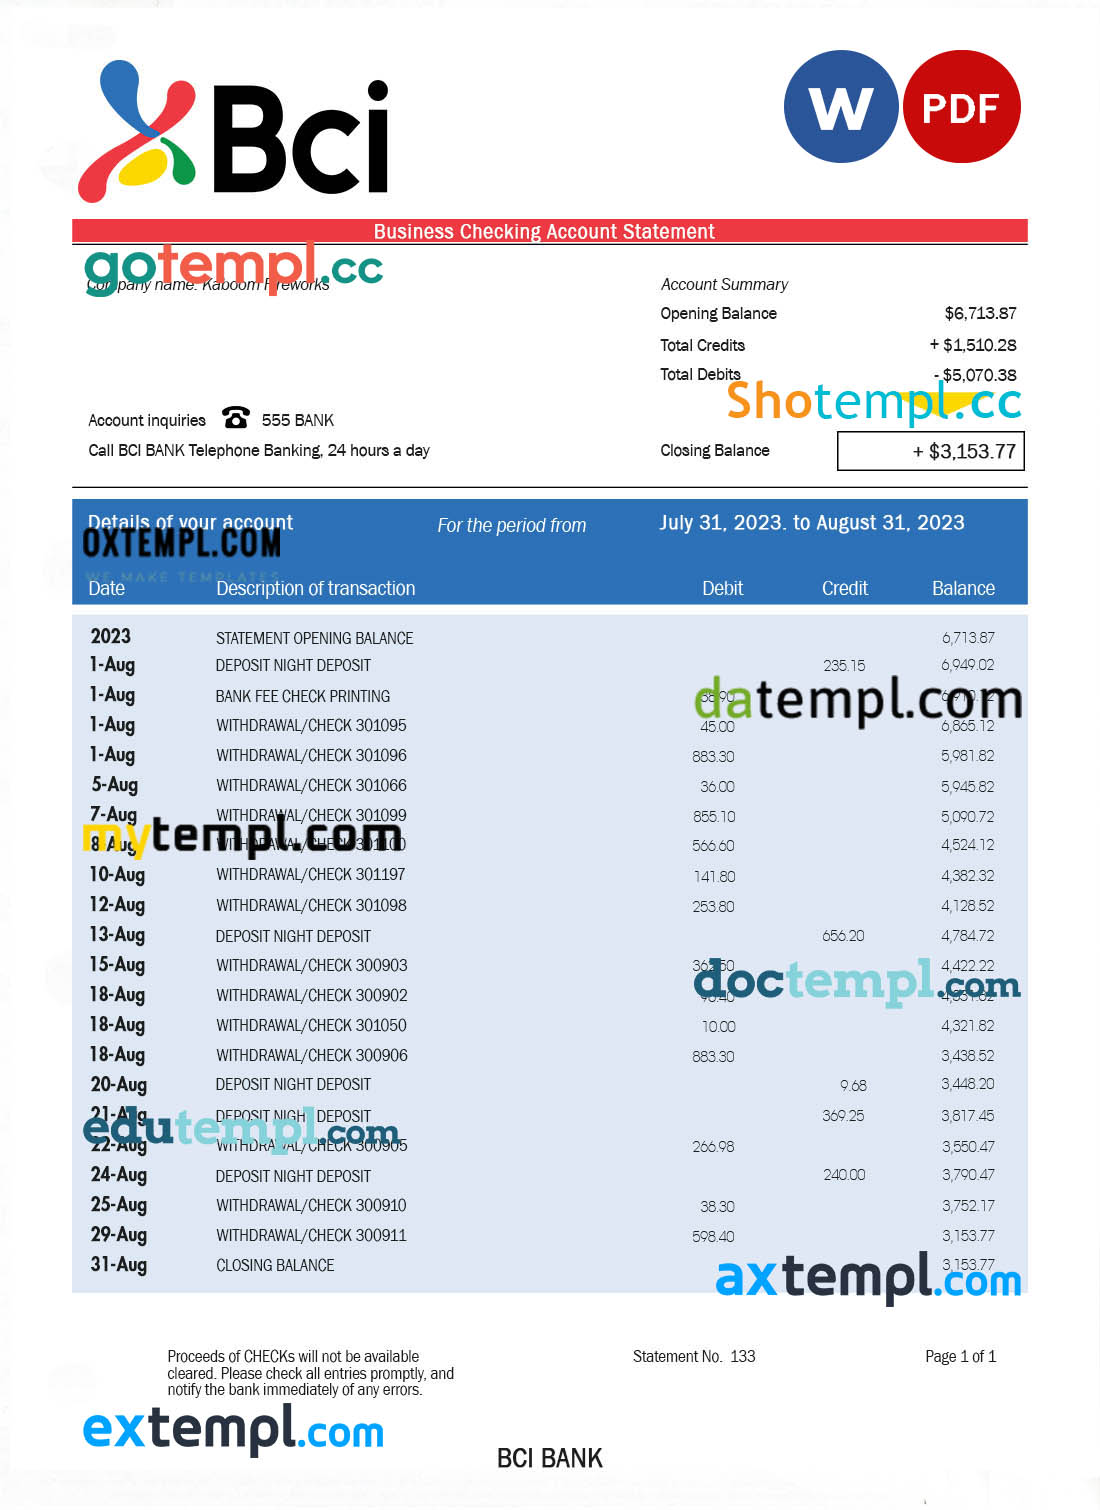 BCI Bank company account statement Word and PDF template